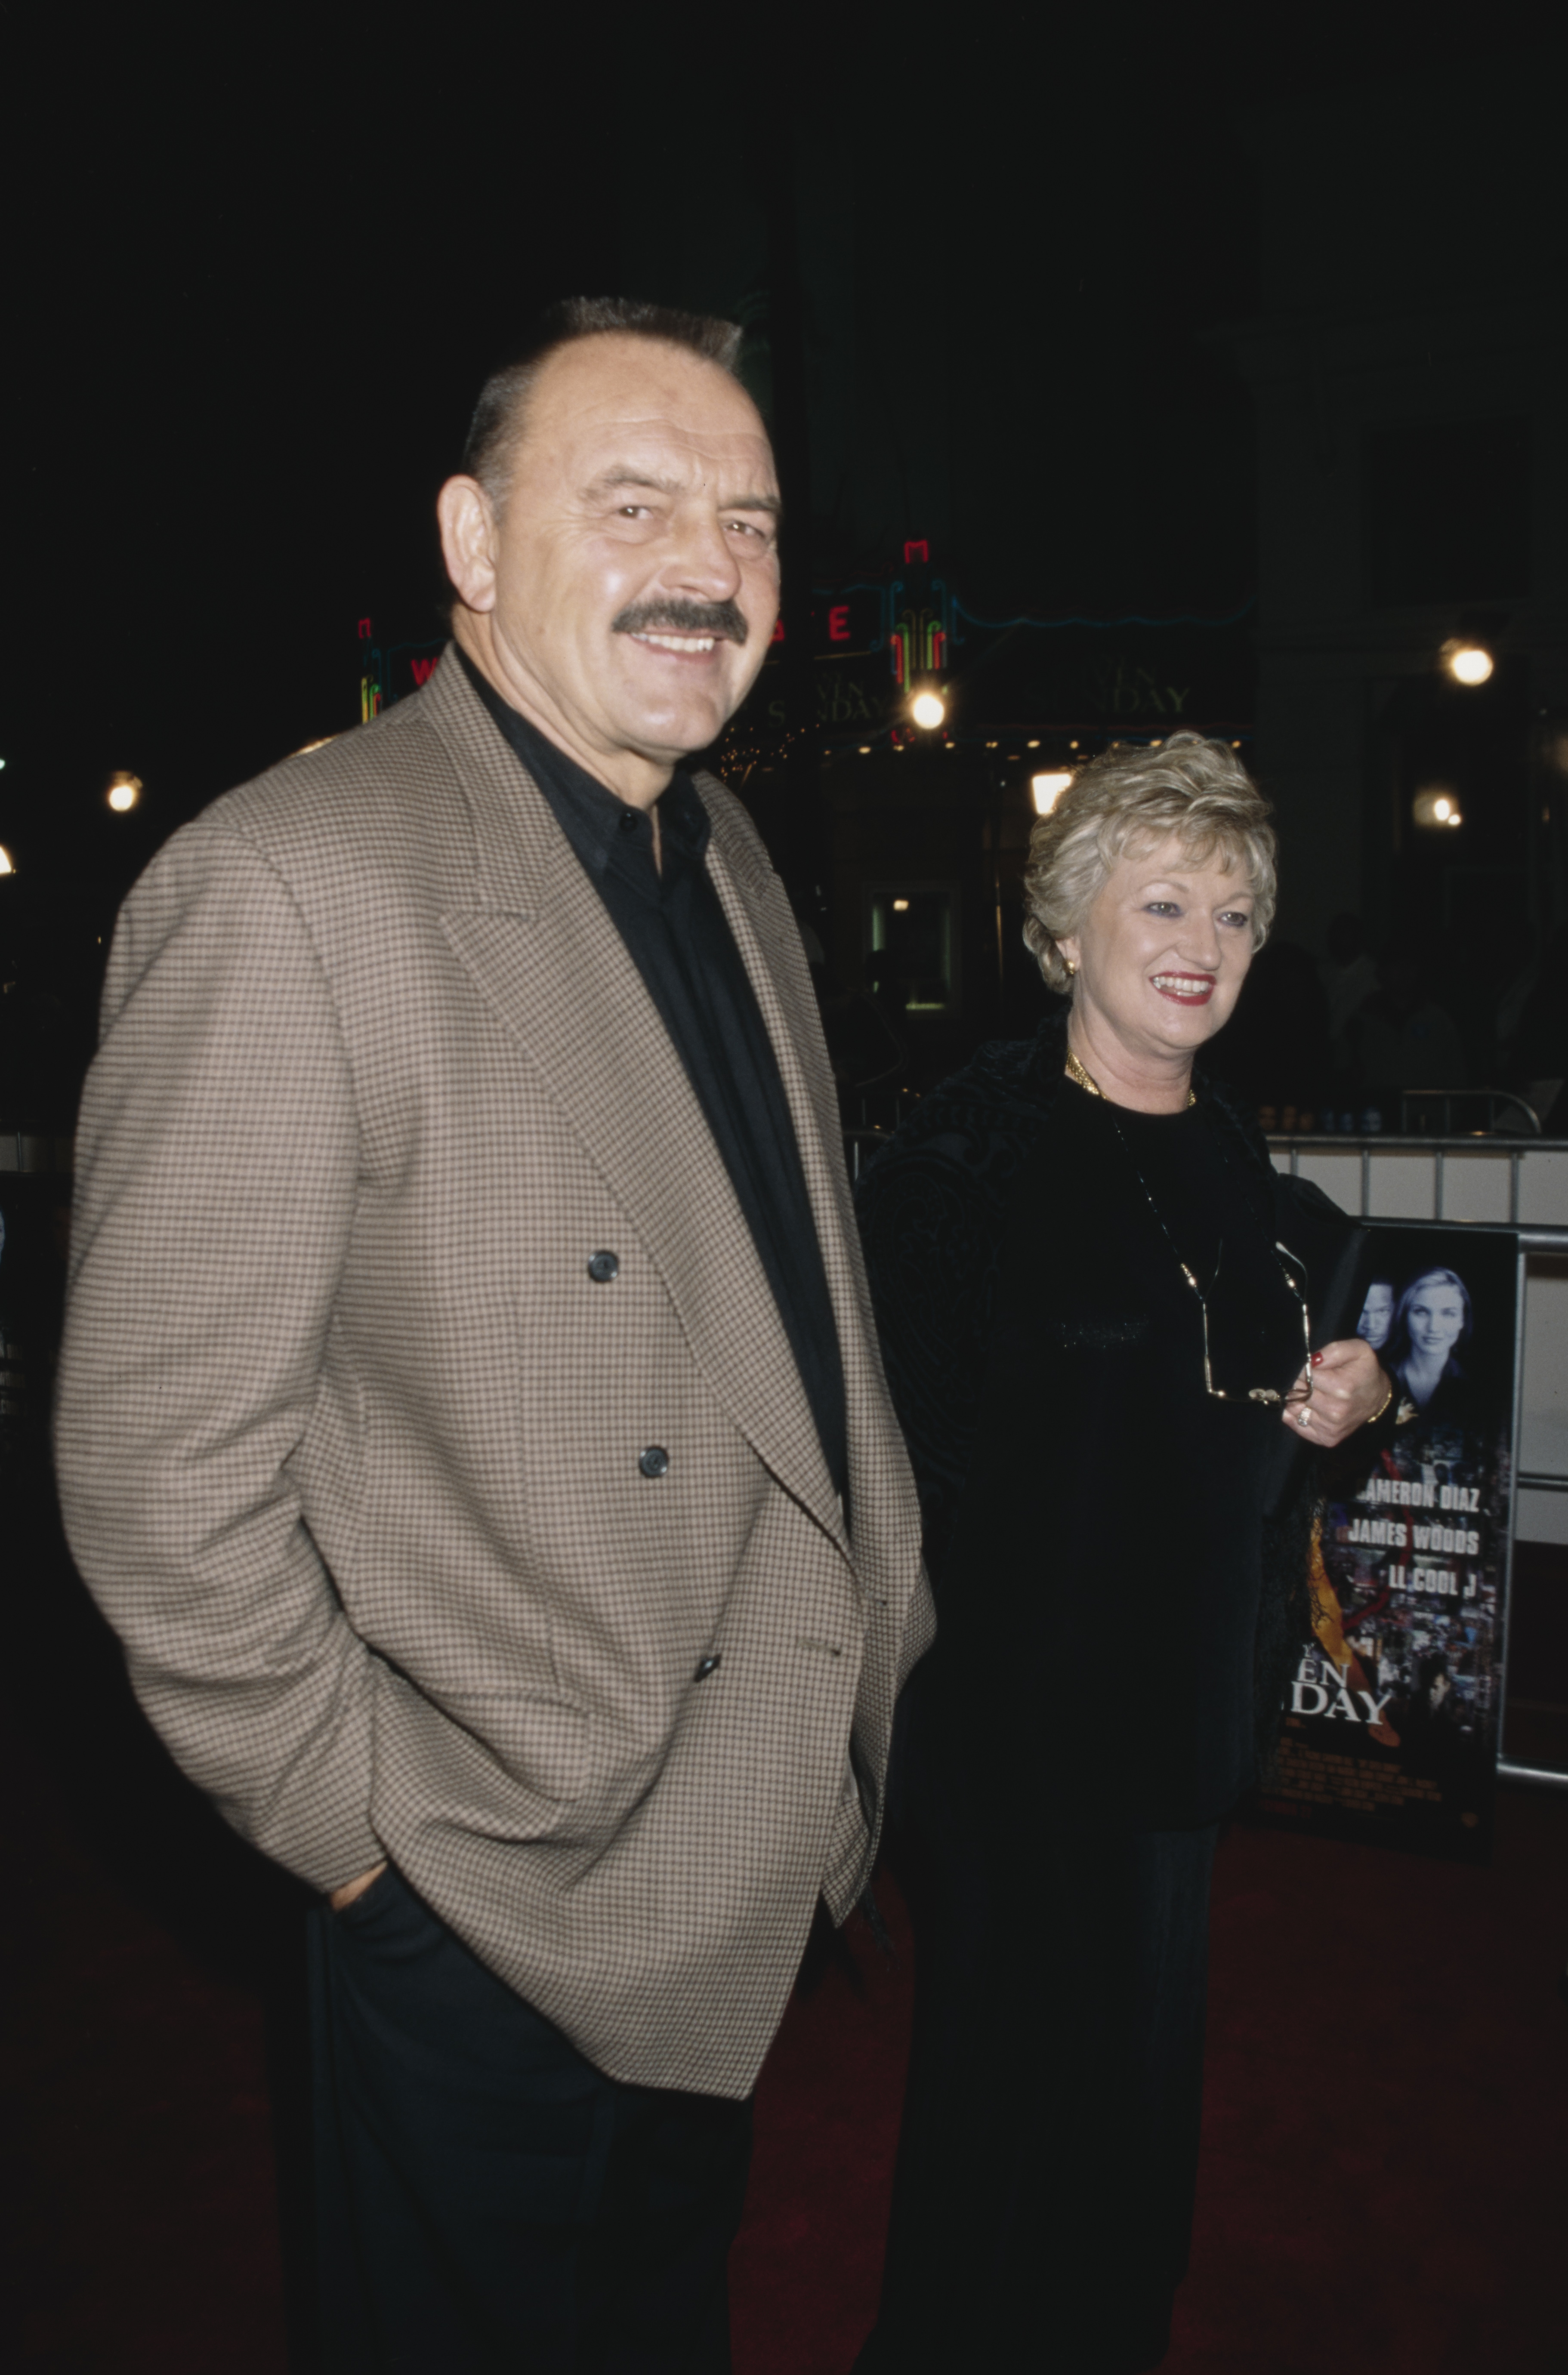 Dick Butkus and Helen Essenhart at the Westwood premiere of "Any Given Sunday," 1999 | Sources: Getty Images